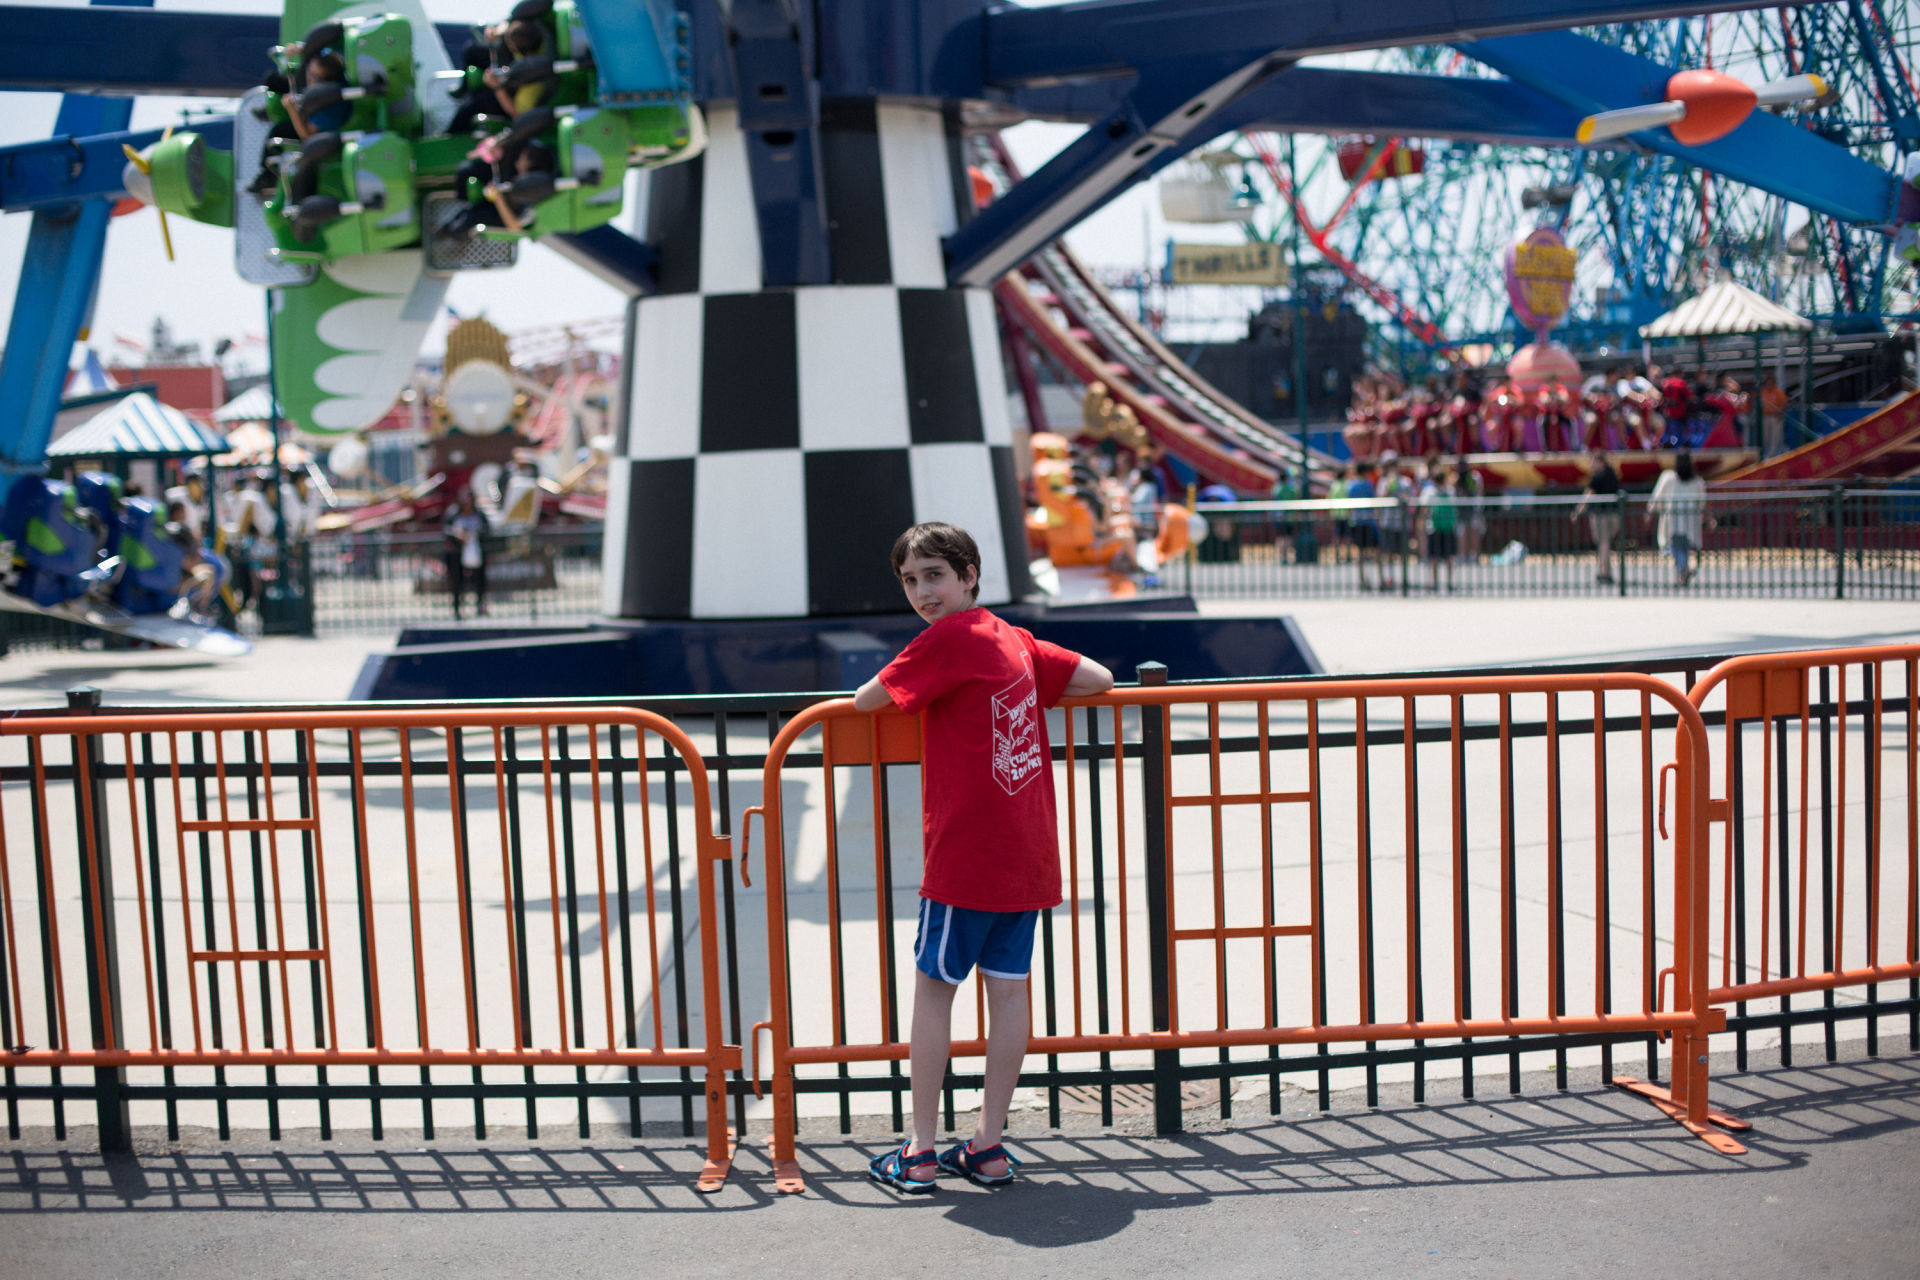 Etai Kurtzman, 12, at Luna Park in Coney Island in Brooklyn, NY May 28, 2015. The group of students from Quest to Learn School took the day trip to Coney Island to analyze user experience on games and rides at Luna Park as part of  their late-spring school curriculum. 